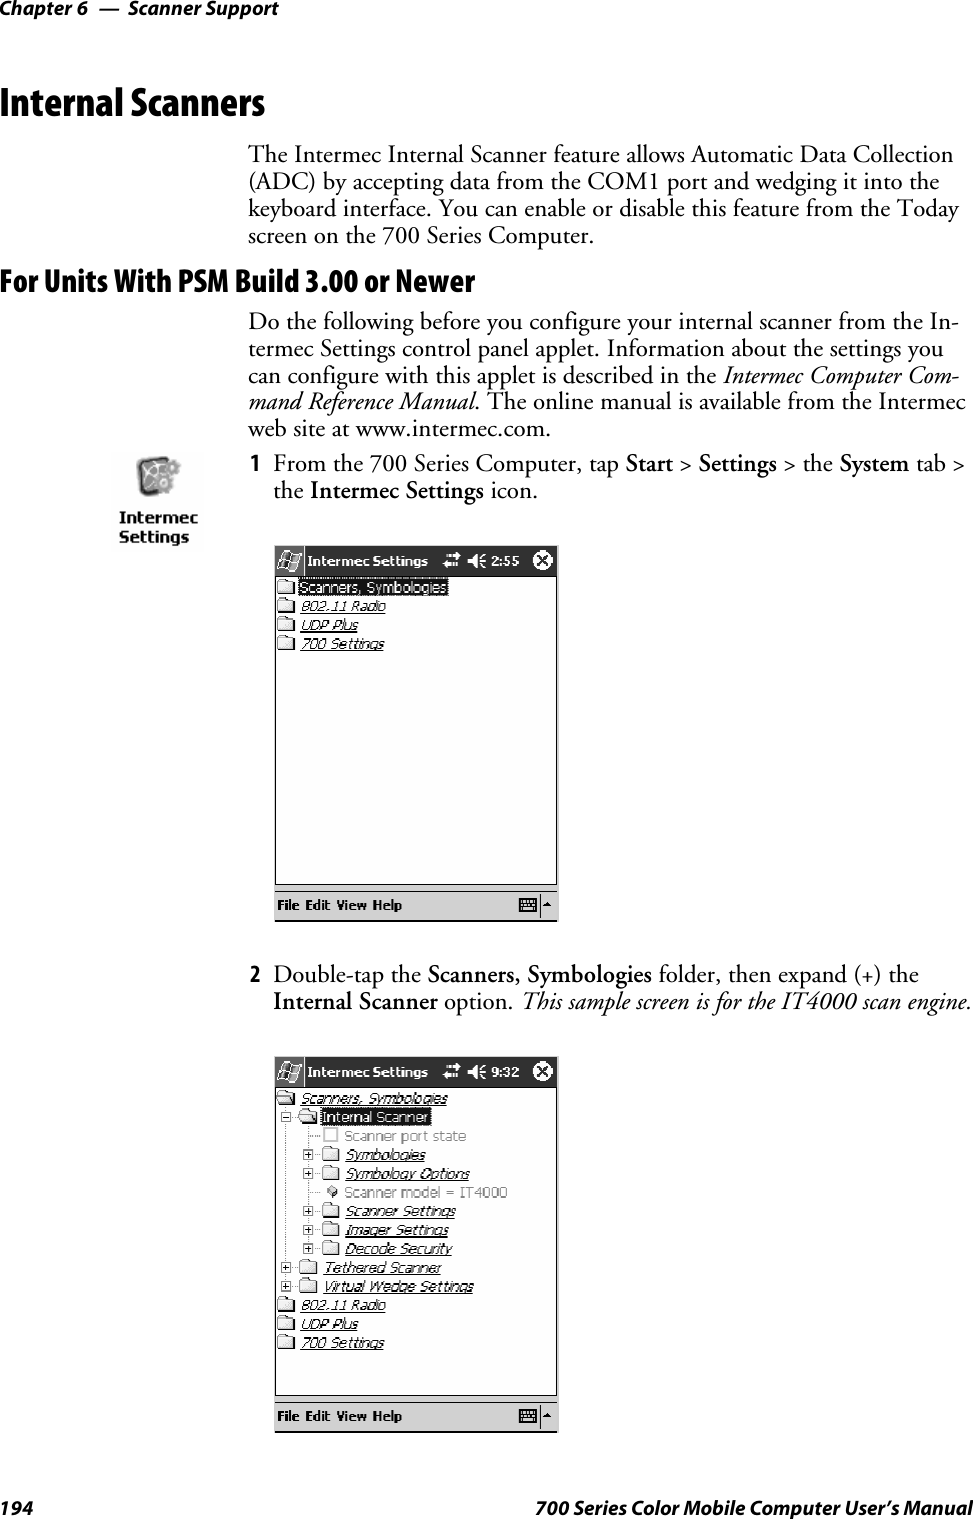 Scanner SupportChapter —6194 700 Series Color Mobile Computer User’s ManualInternal ScannersThe Intermec Internal Scanner feature allows Automatic Data Collection(ADC) by accepting data from the COM1 port and wedging it into thekeyboard interface. You can enable or disable this feature from the Todayscreen on the 700 Series Computer.For Units With PSM Build 3.00 or NewerDo the following before you configure your internal scanner from the In-termec Settings control panel applet. Information about the settings youcan configure with this applet is described in the Intermec Computer Com-mand Reference Manual. The online manual is available from the Intermecweb site at www.intermec.com.1From the 700 Series Computer, tap Start &gt;Settings &gt;theSystem tab &gt;the Intermec Settings icon.2Double-tap the Scanners, Symbologies folder, then expand (+) theInternal Scanner option. This sample screen is for the IT4000 scan engine.